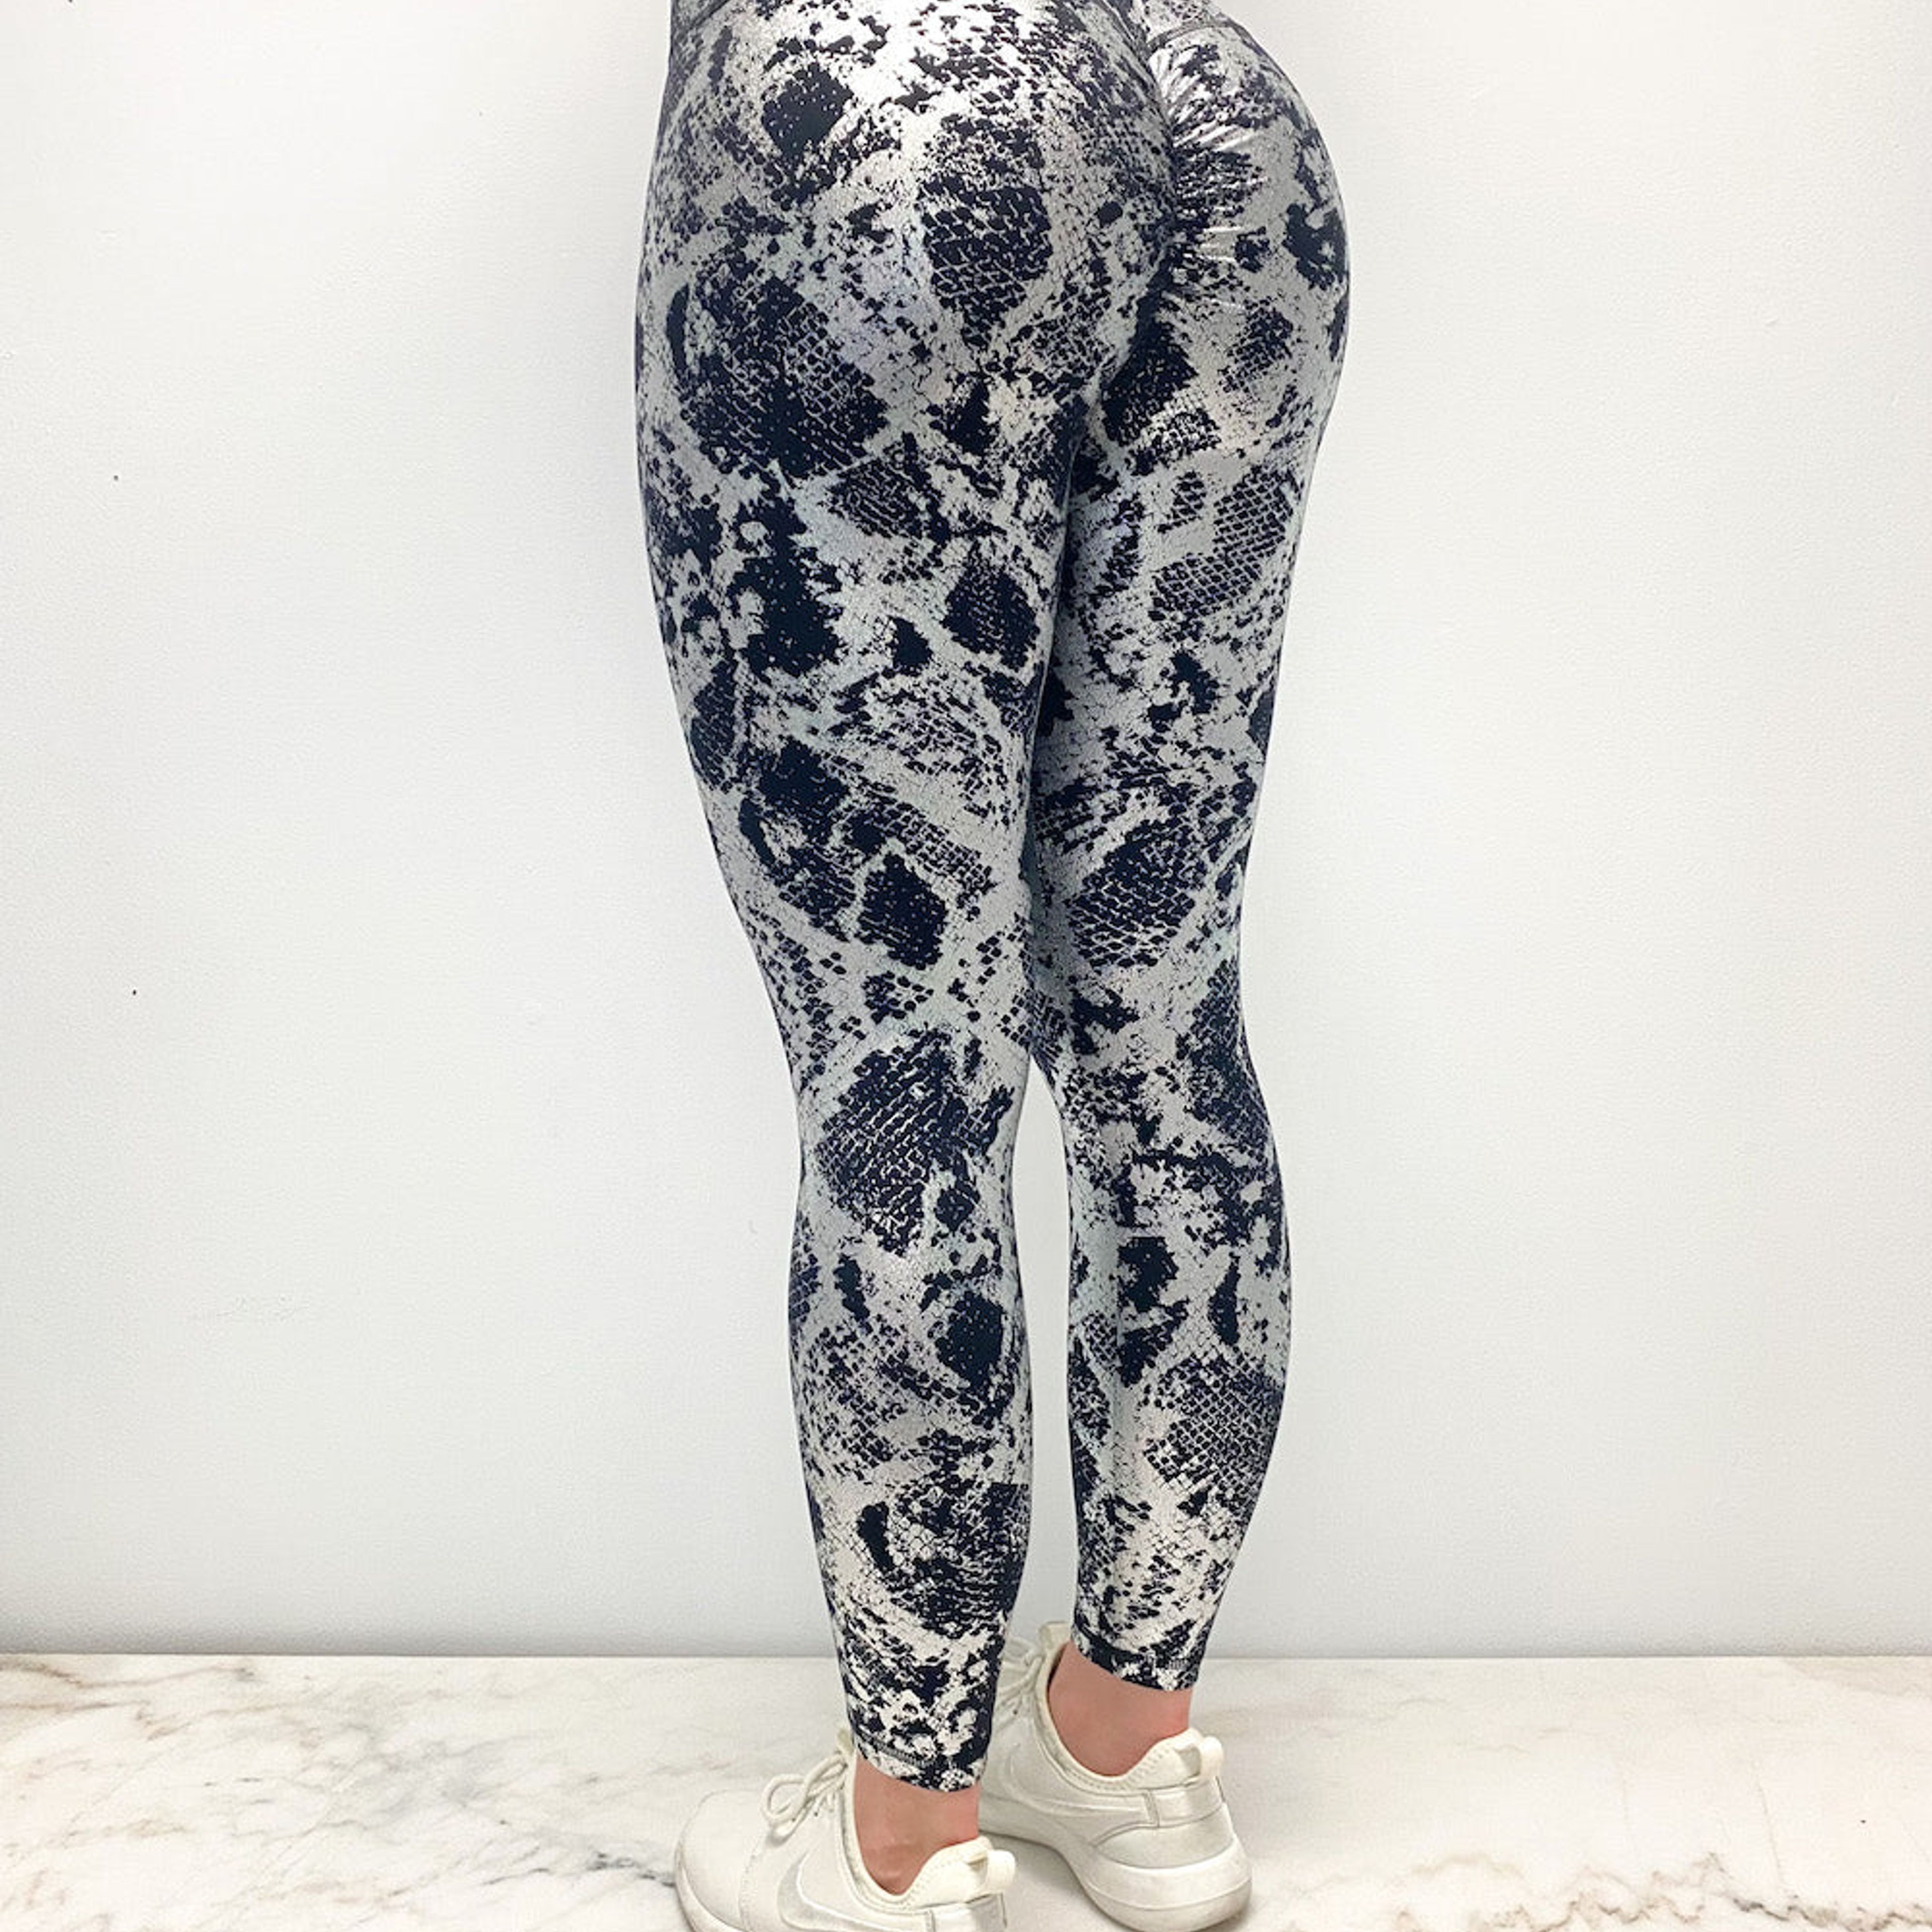 https://cdn.prod.marmalade.co/products/3840x3840/filters:quality(80)/www.astoria-activewear.com%2Fproducts%2Fastoria-luxe-metallic-series-legging-black%2F1634922025%2FIMG_8962_jpg.jpg